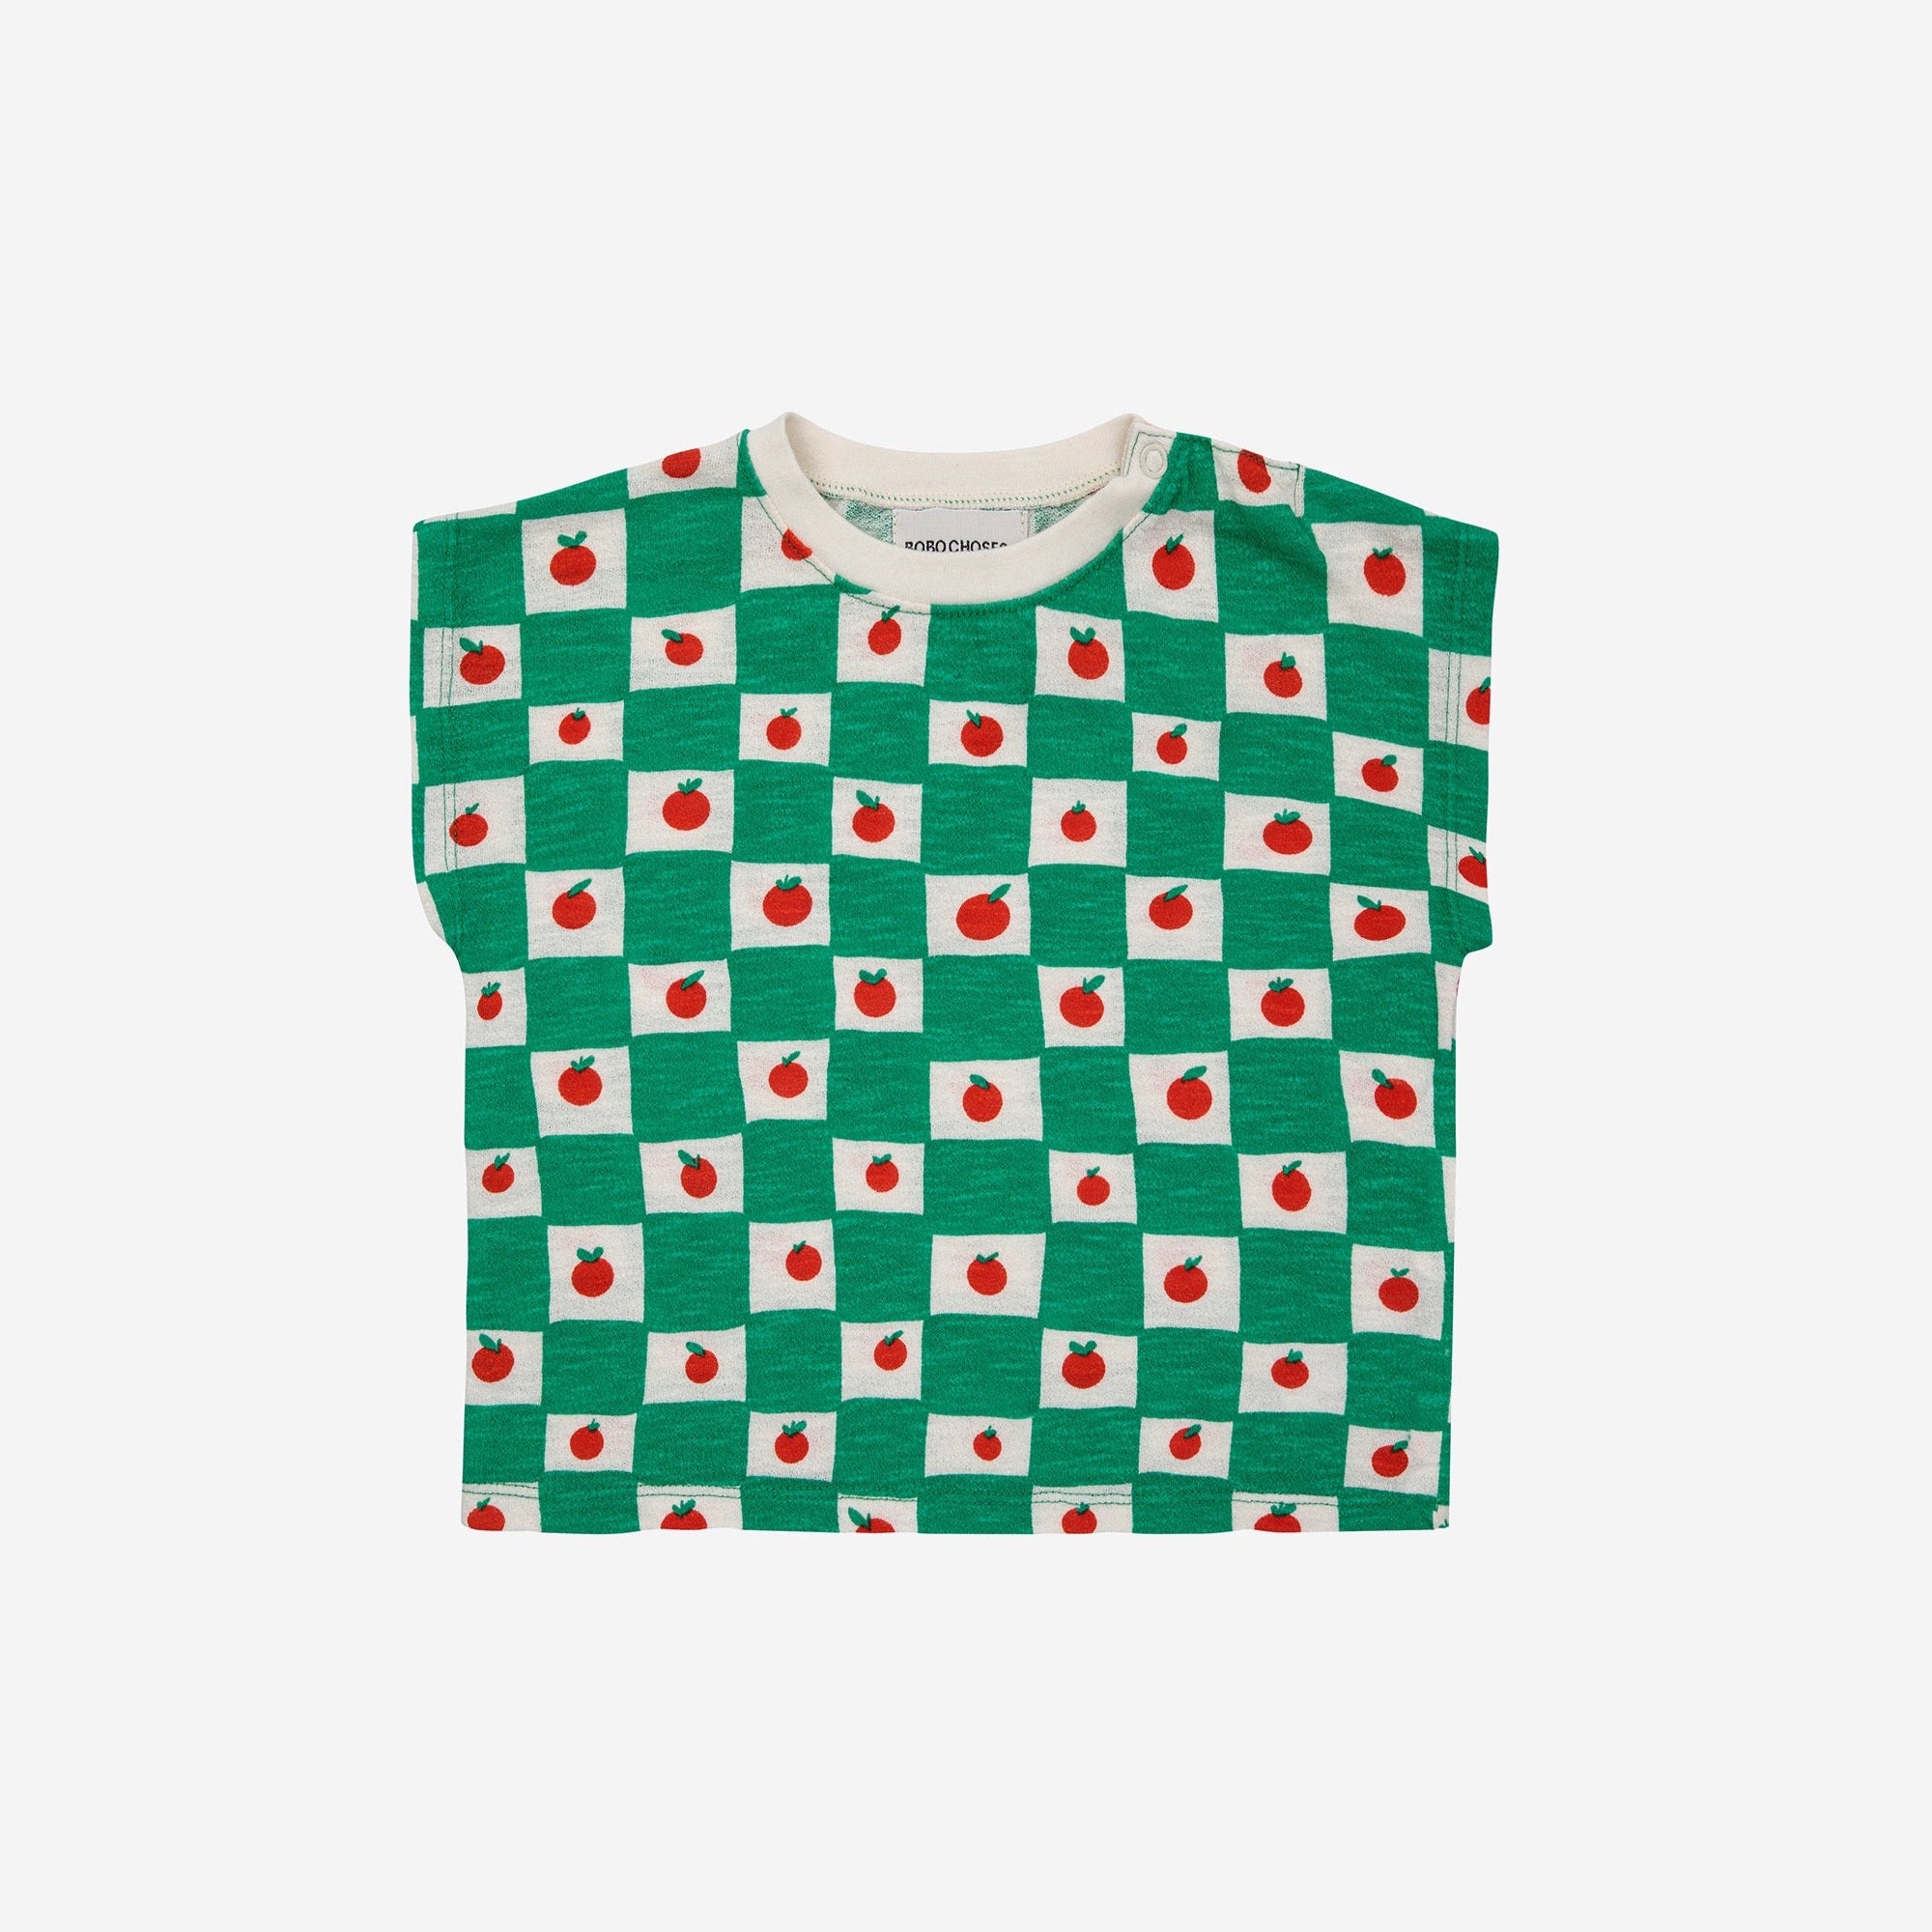 child wearing green and white checked t-shirt with tomato print